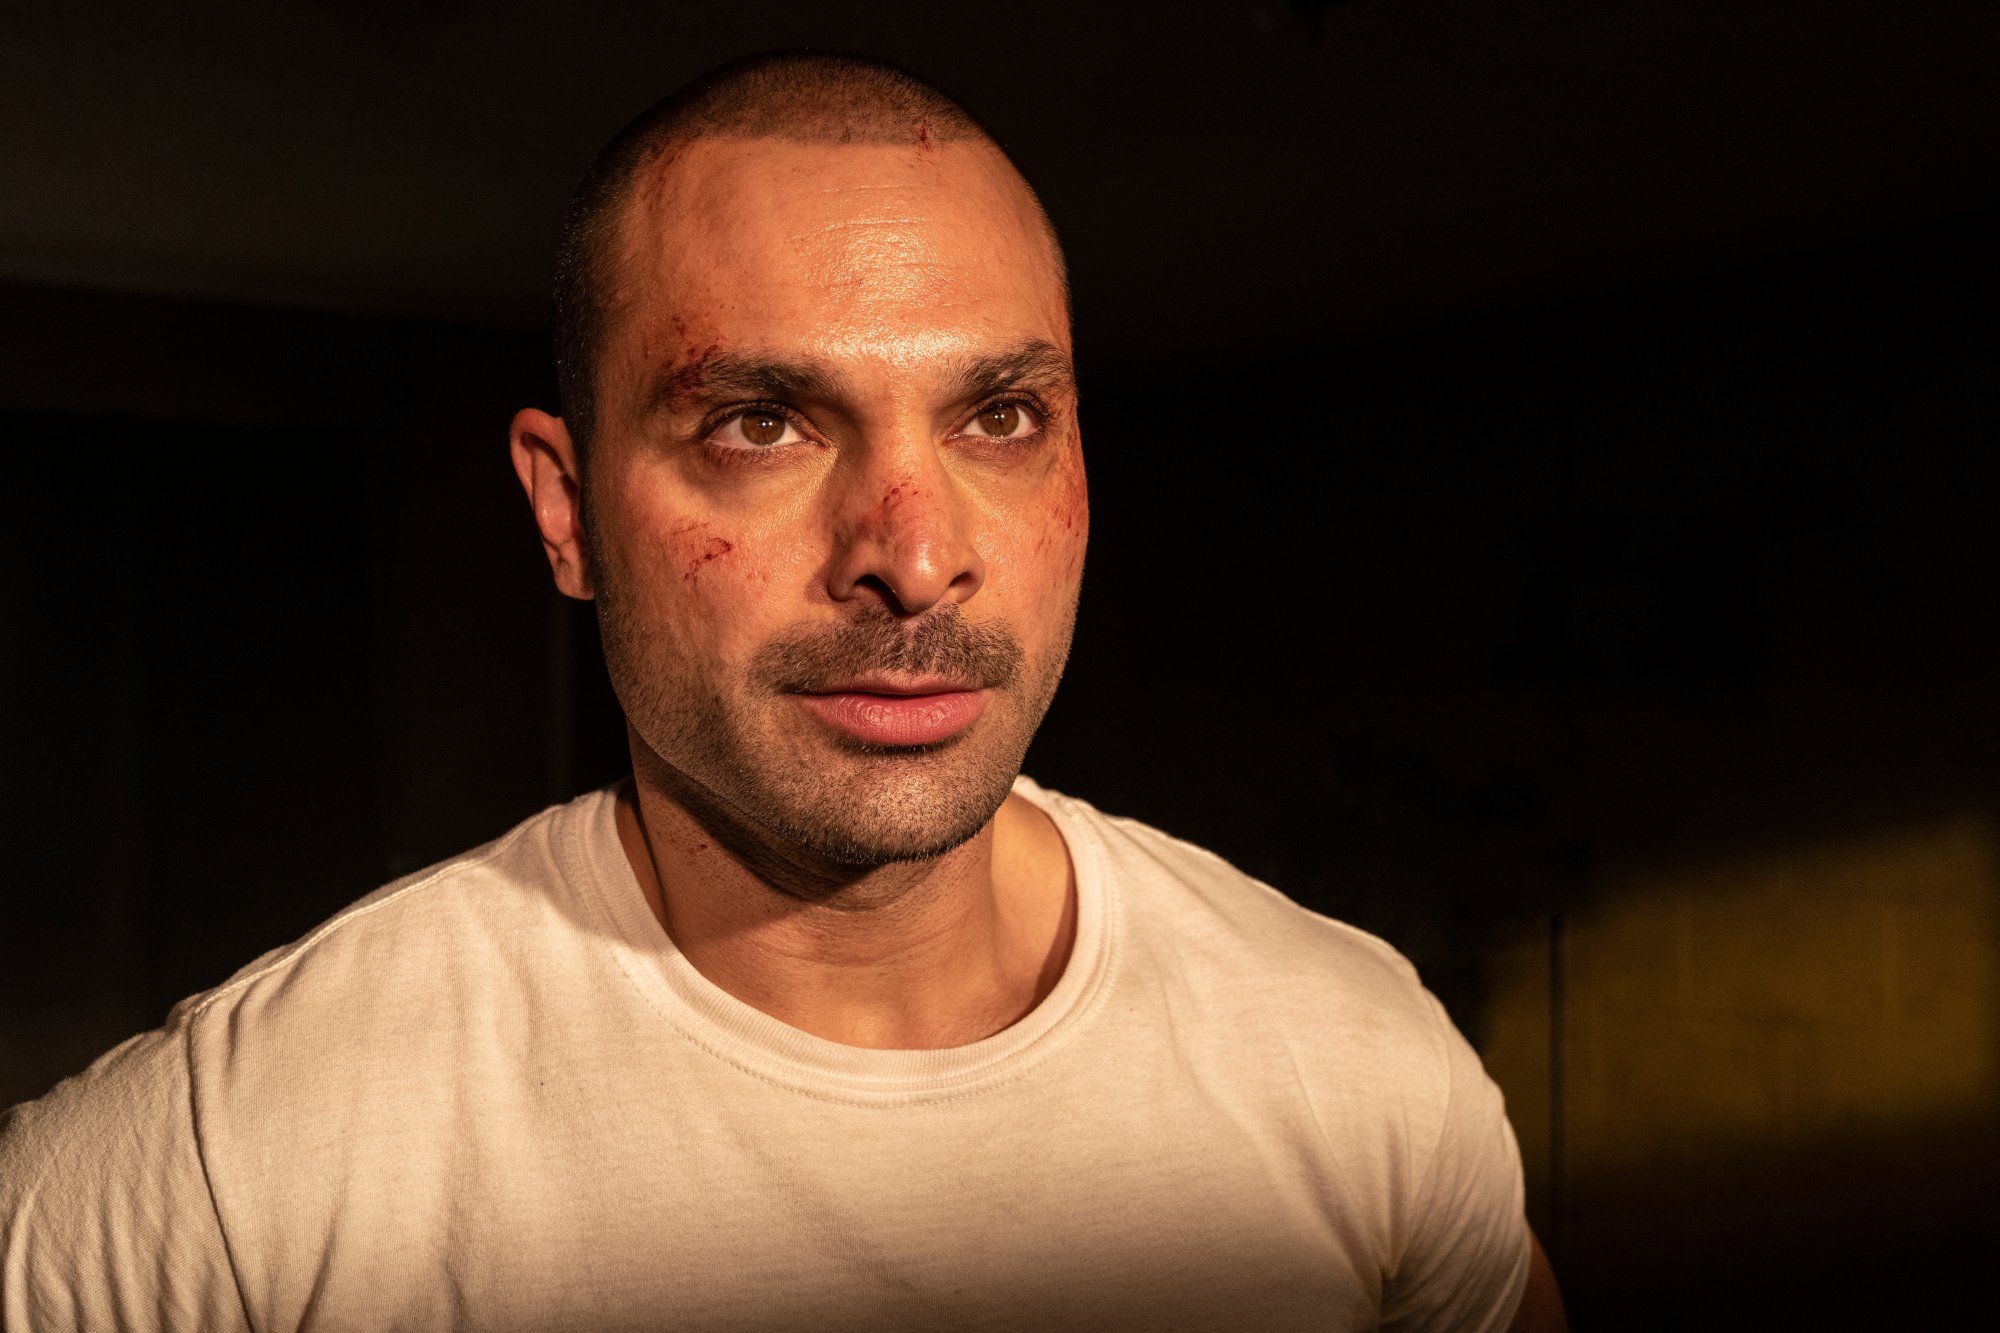 Michael Mando as Nacho Varga in 'Better Call Saul' Season 6. He's wearing a white T-shirt and has cuts on his face.